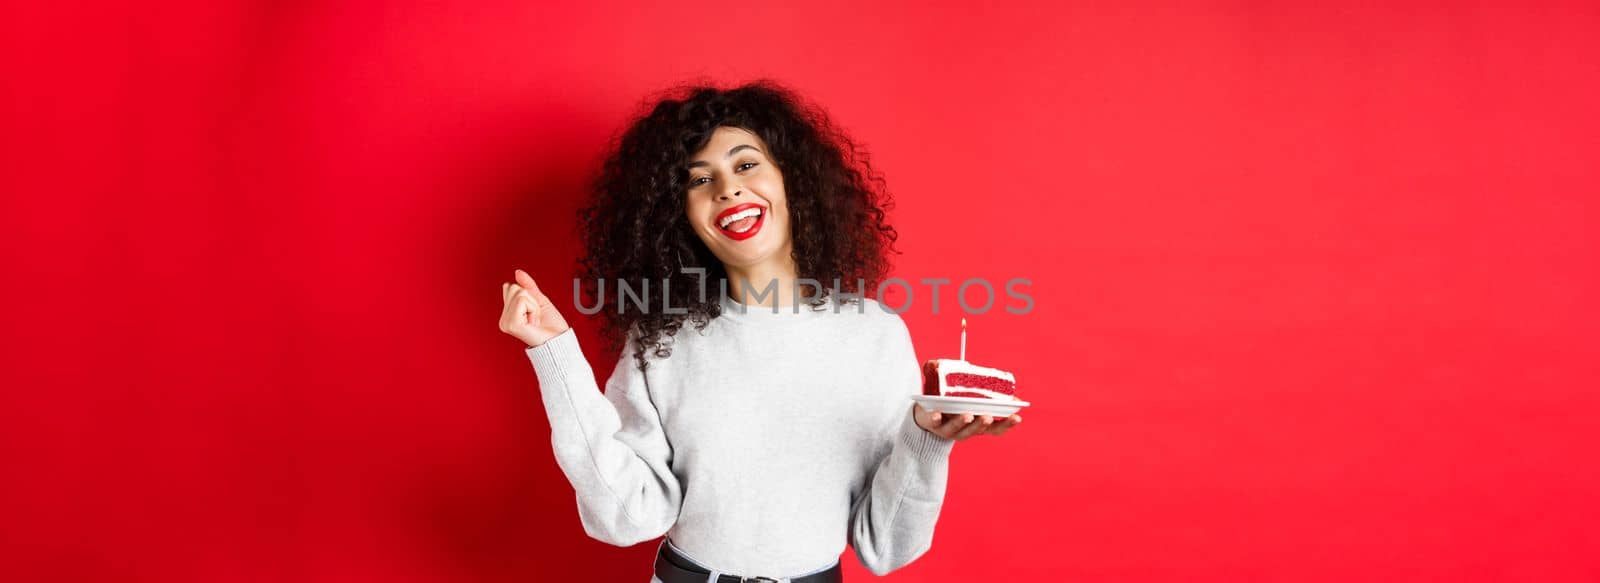 Celebration and holidays concept. Happy beautiful woman dancing and making birthday wish, holding b-day cake and smiling, standing on red background by Benzoix